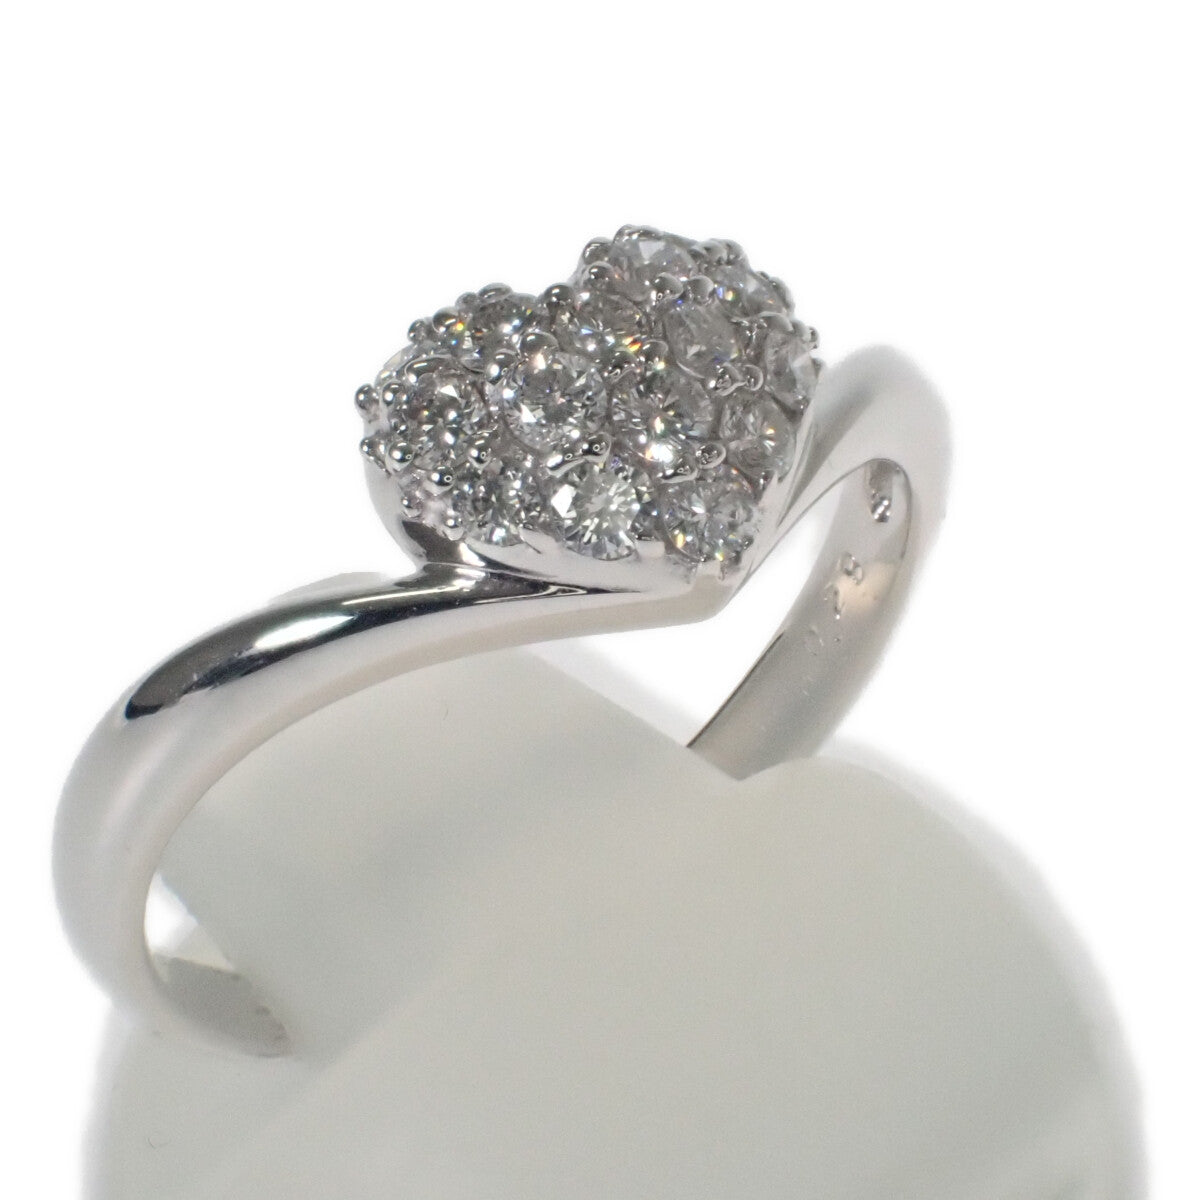 Ladies' K18 White Gold Heart Pave Design Diamond Ring (0.28ct) - Size 11, Preowned